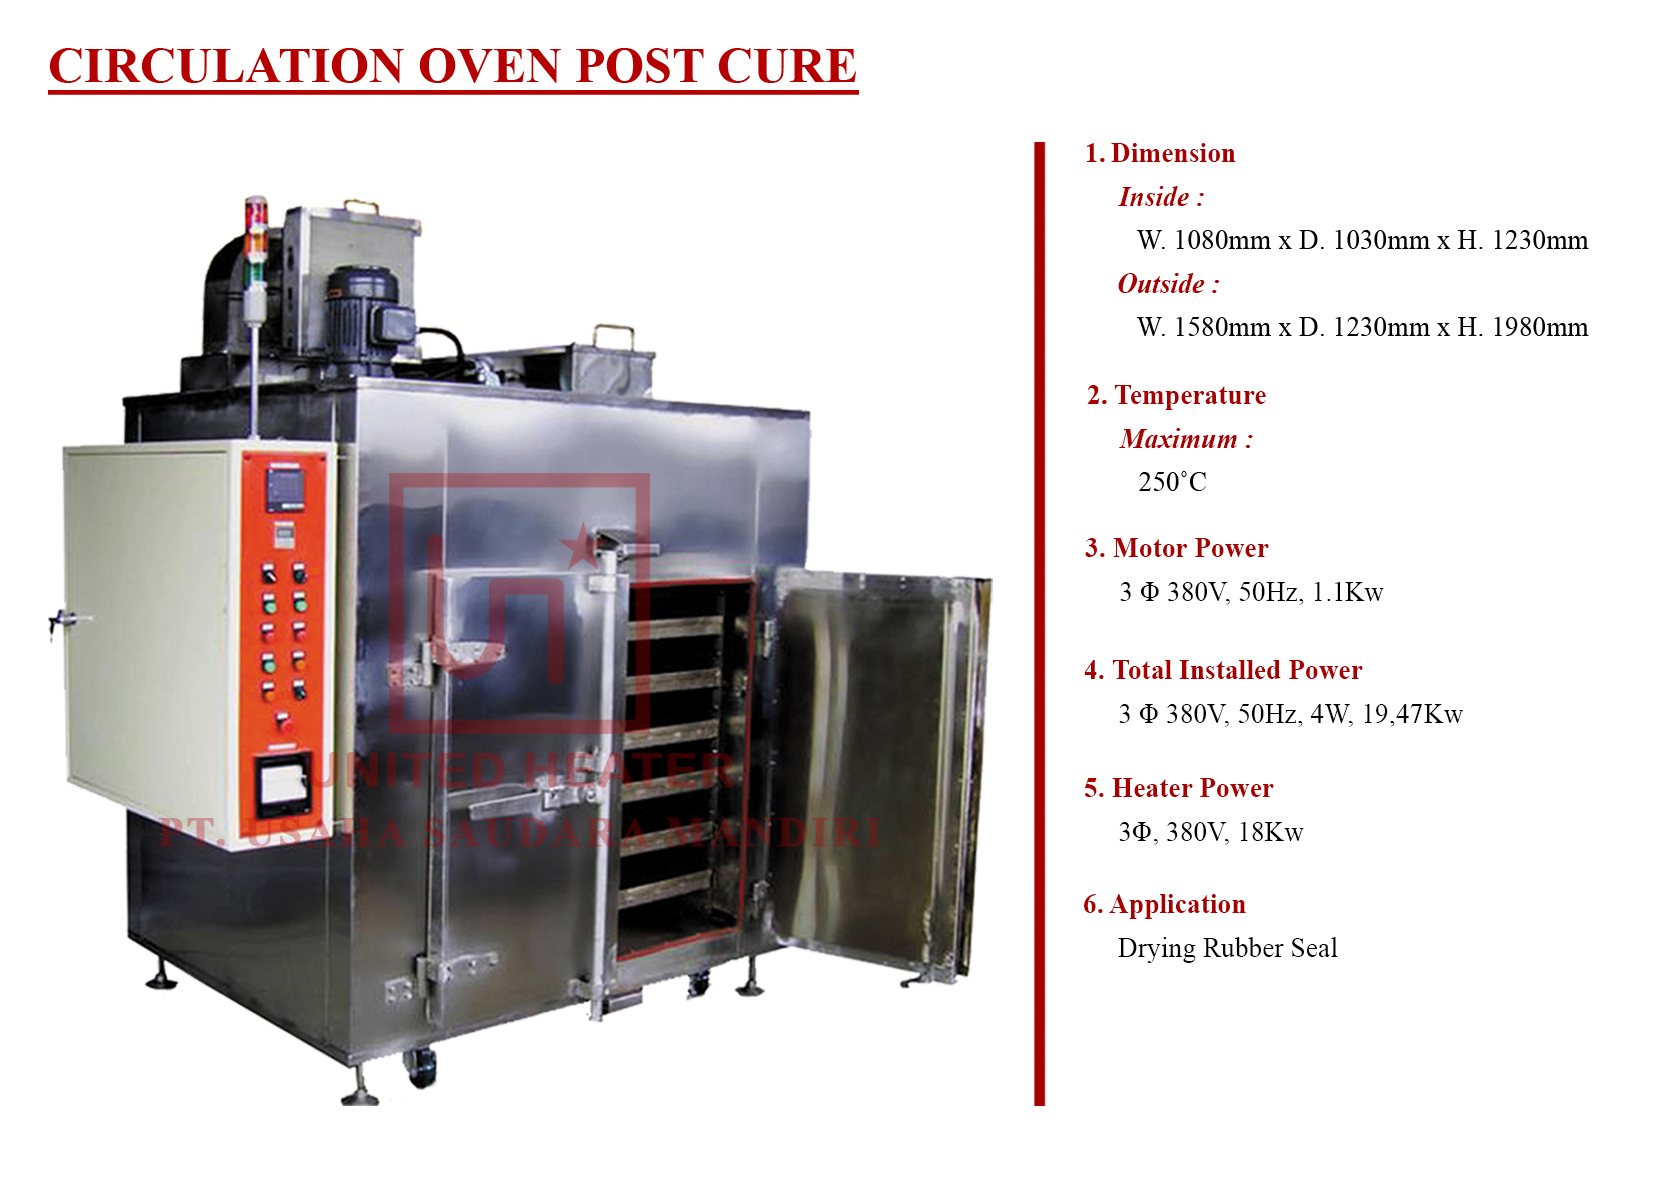 CIRCULATION OVEN POST CURE